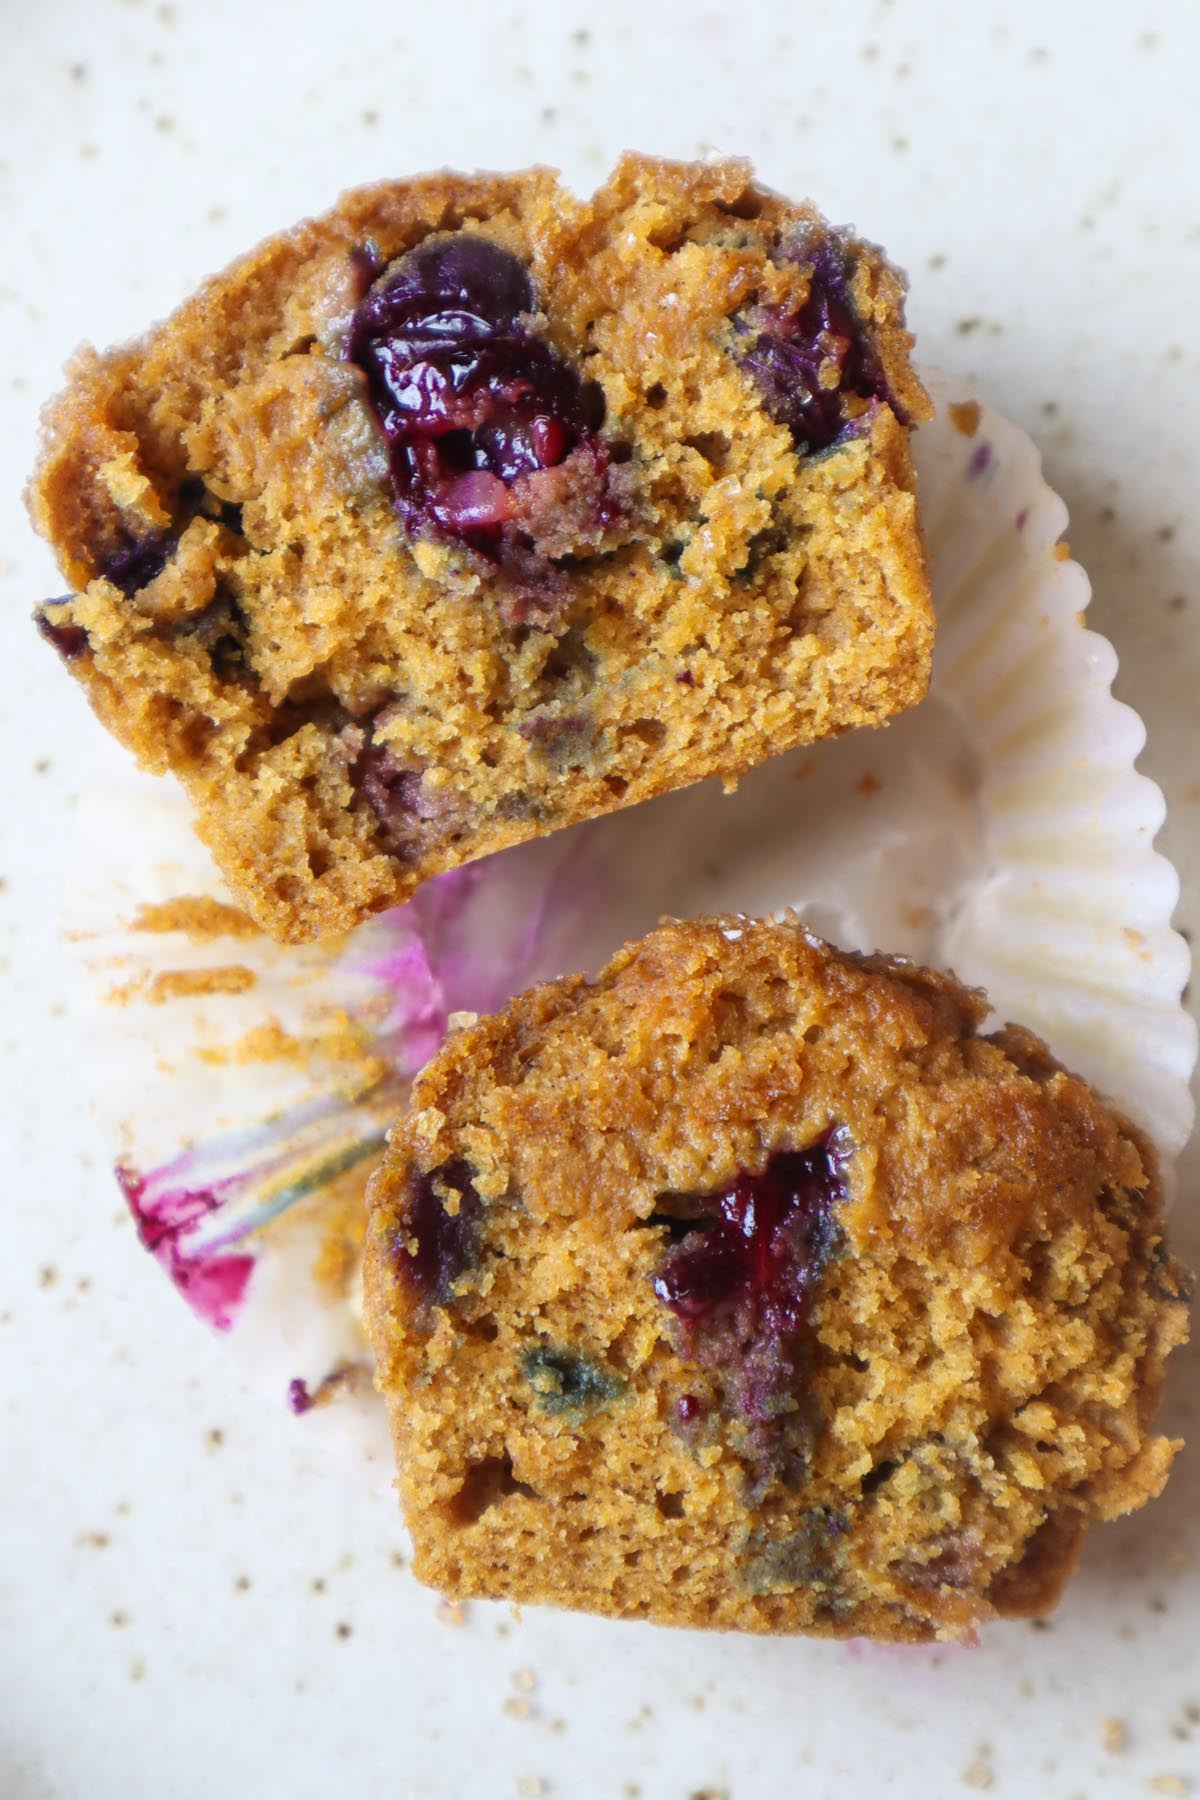 pumpkin blueberry muffin sliced in half showing a juicy blueberries in the middle